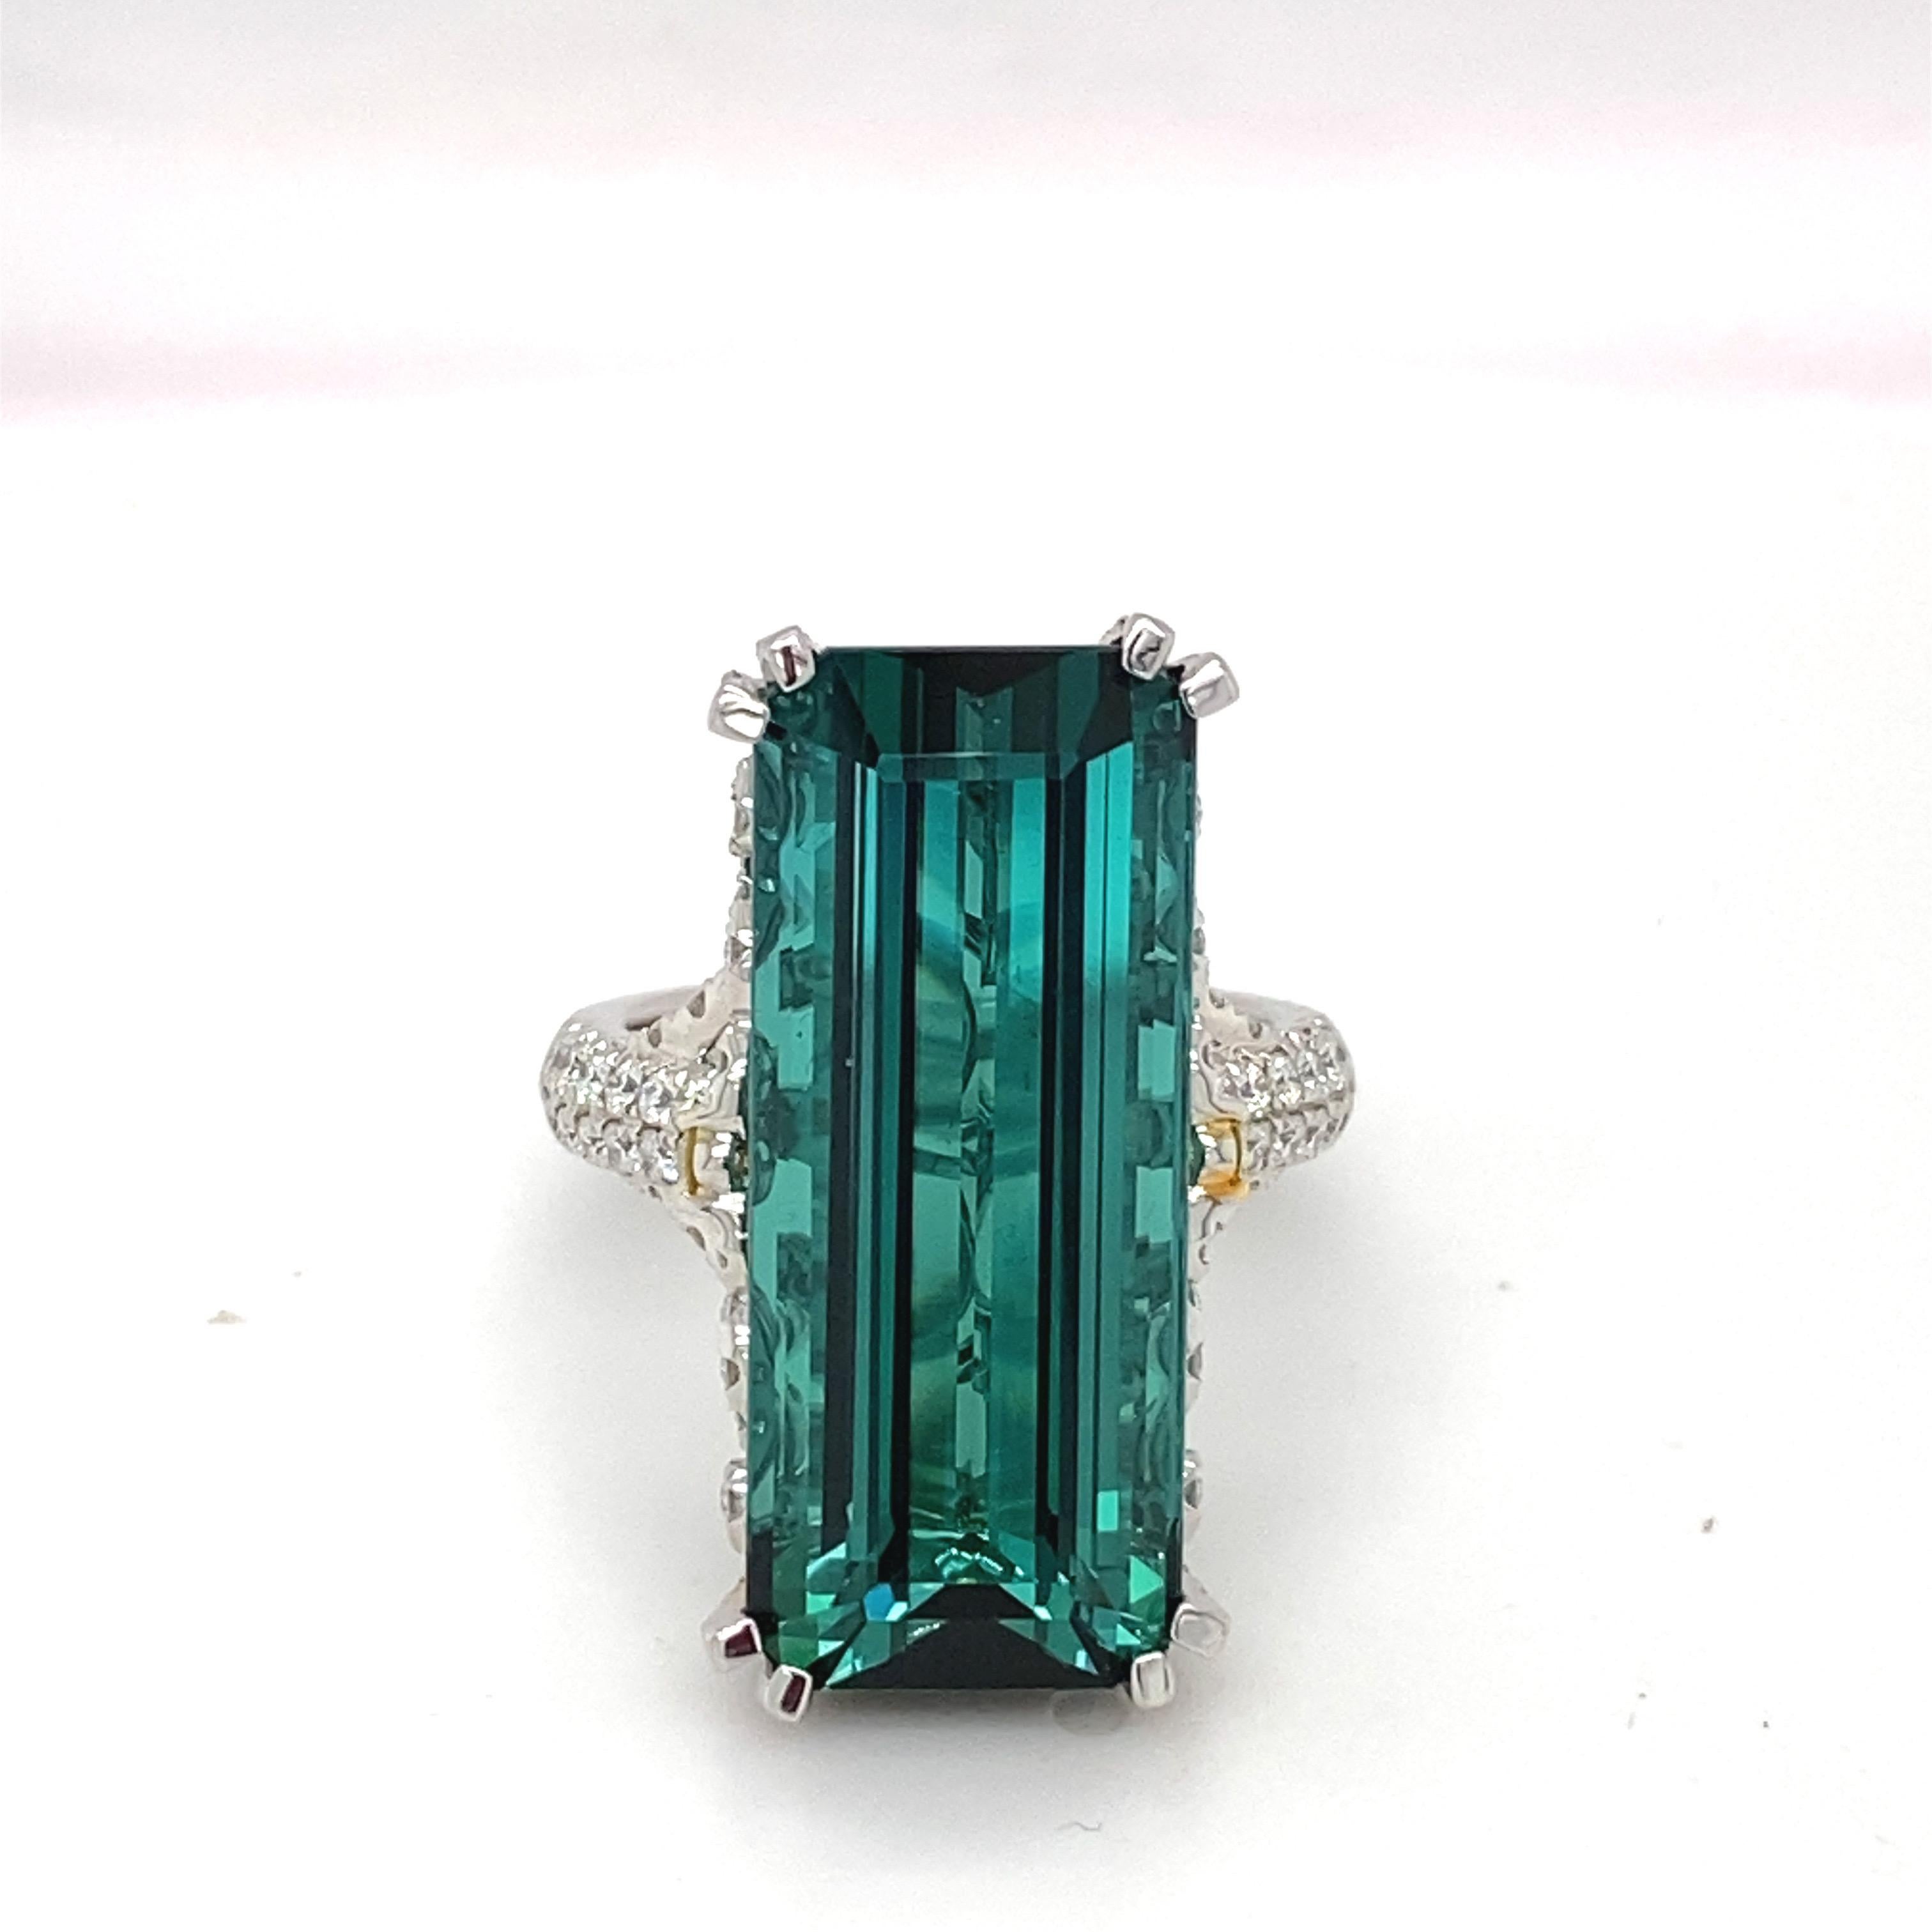 This magnificent 21.86 carat baguette cut Indicolite Tourmaline Diamond ring is mounted in white gold. This exceedingly feminine ring dazzles with the richness and delicacy of it detail work accented with white and yellow diamond. This ring is a